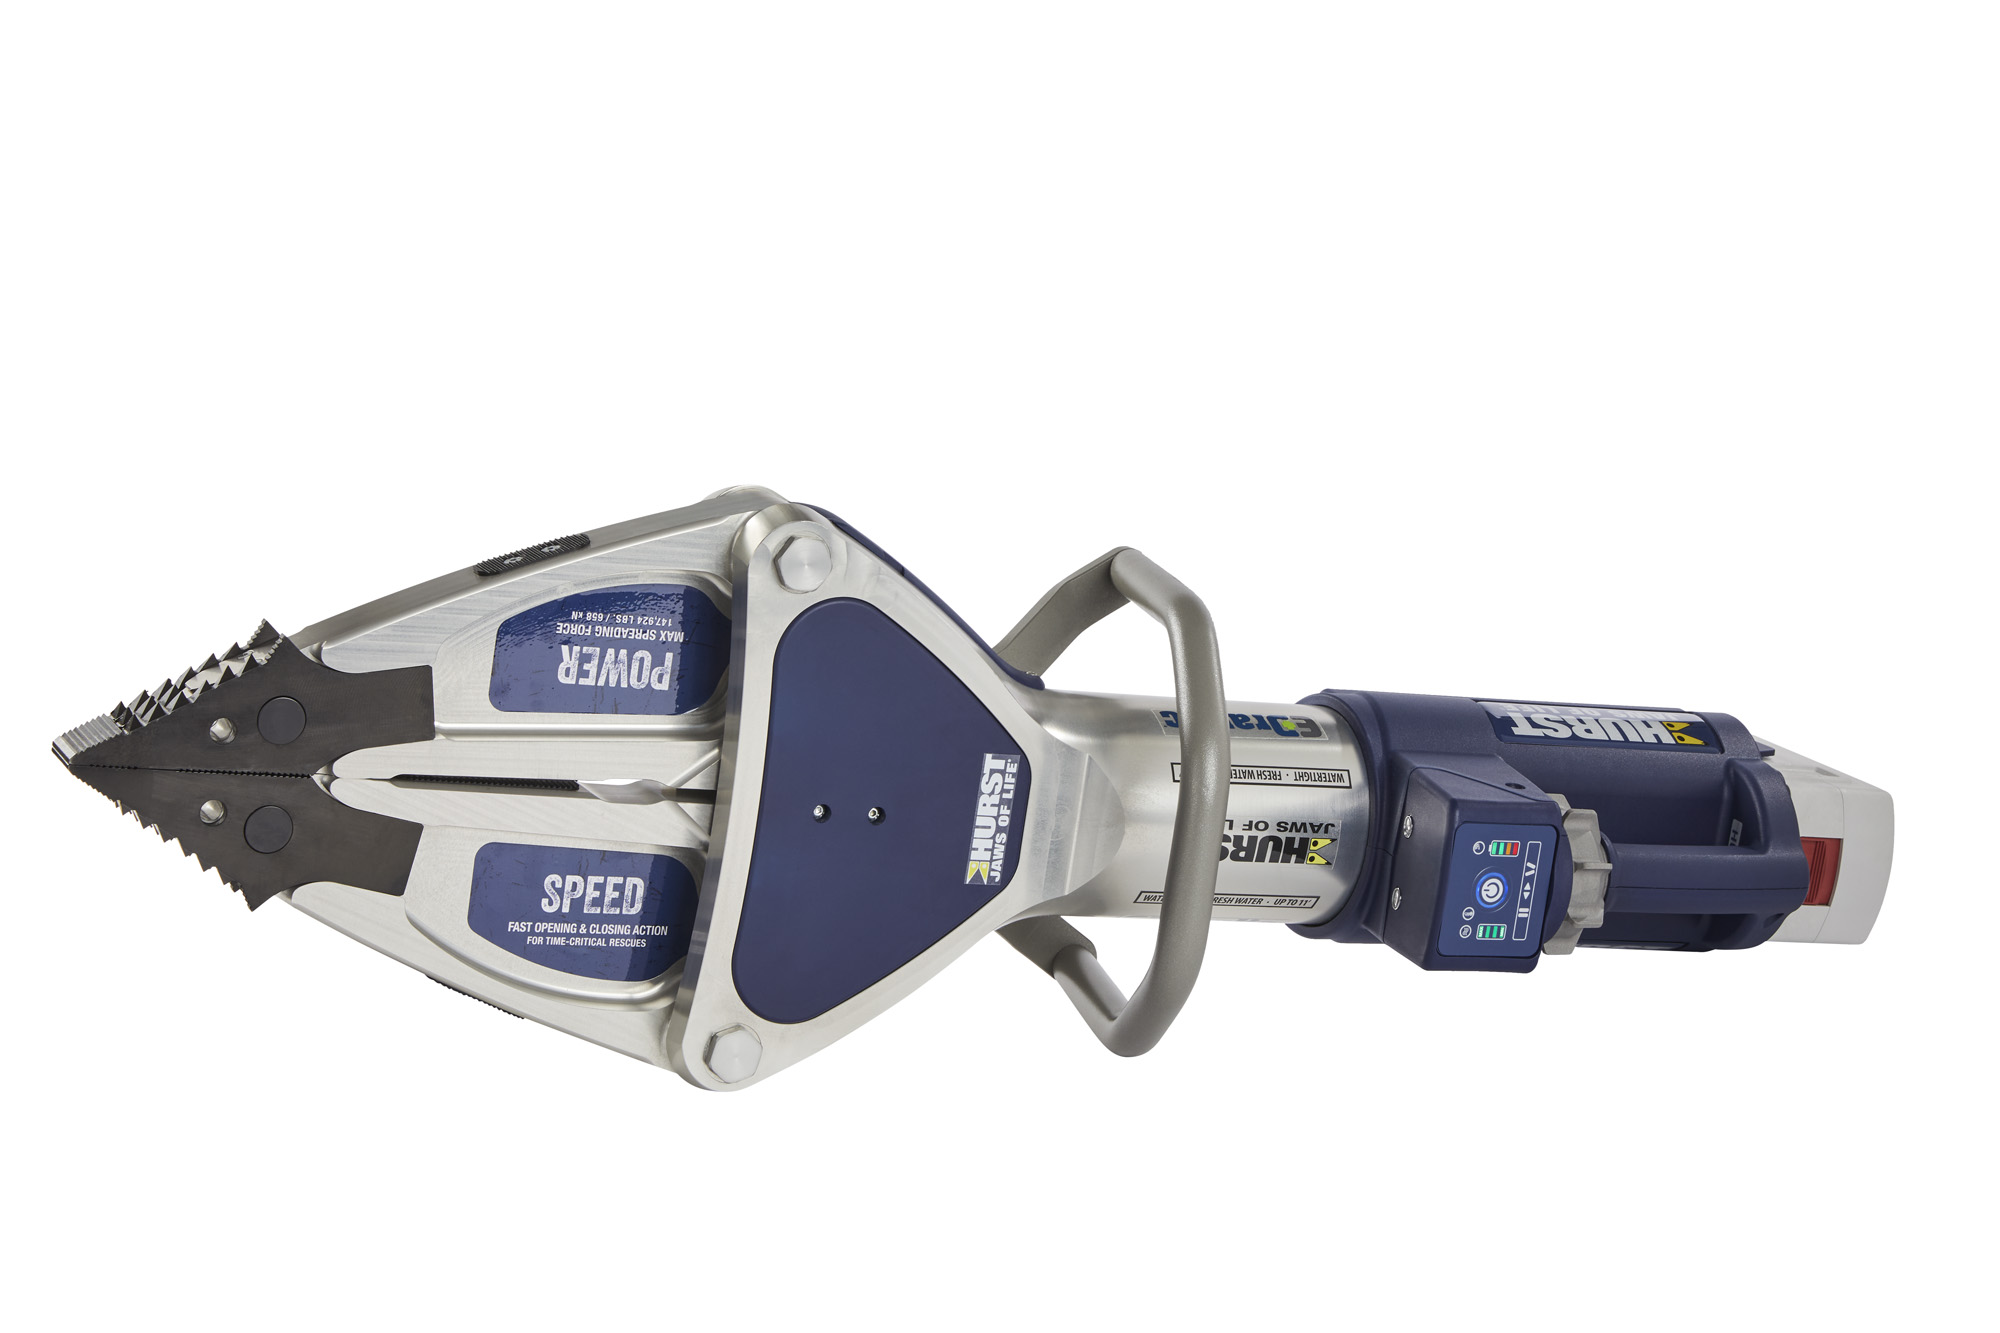 HURST Jaws of Life Launches eDRAULIC 3.0 Extrication Tool Line